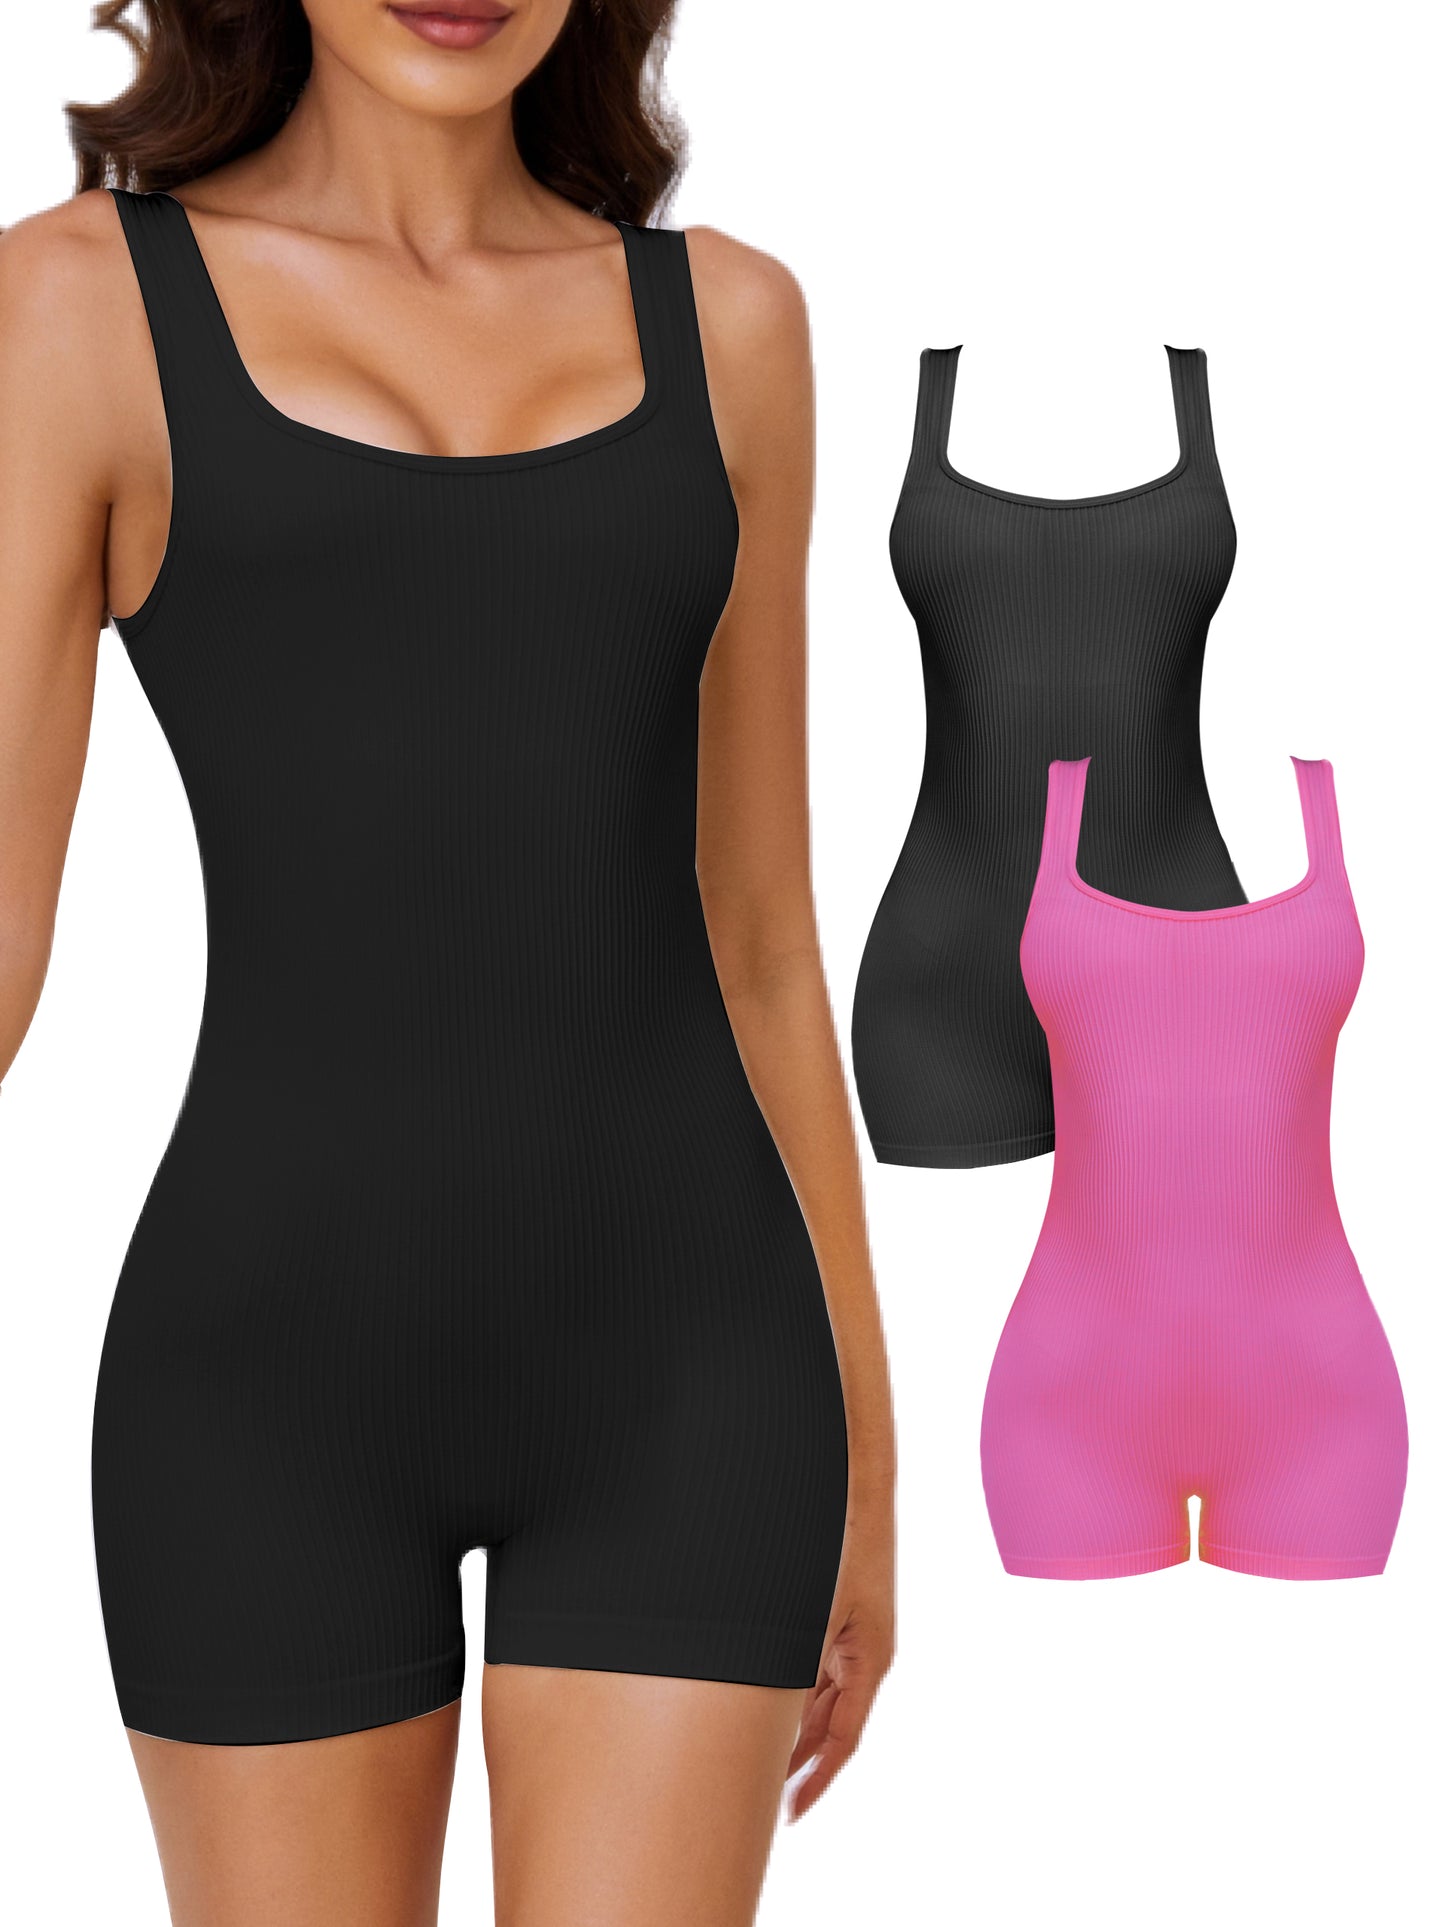 CHARMMA Seamless Rompers Bodysuit for Women - Tummy Control Shorts Jumpsuit Tank Top Catsuit Yoga Workout